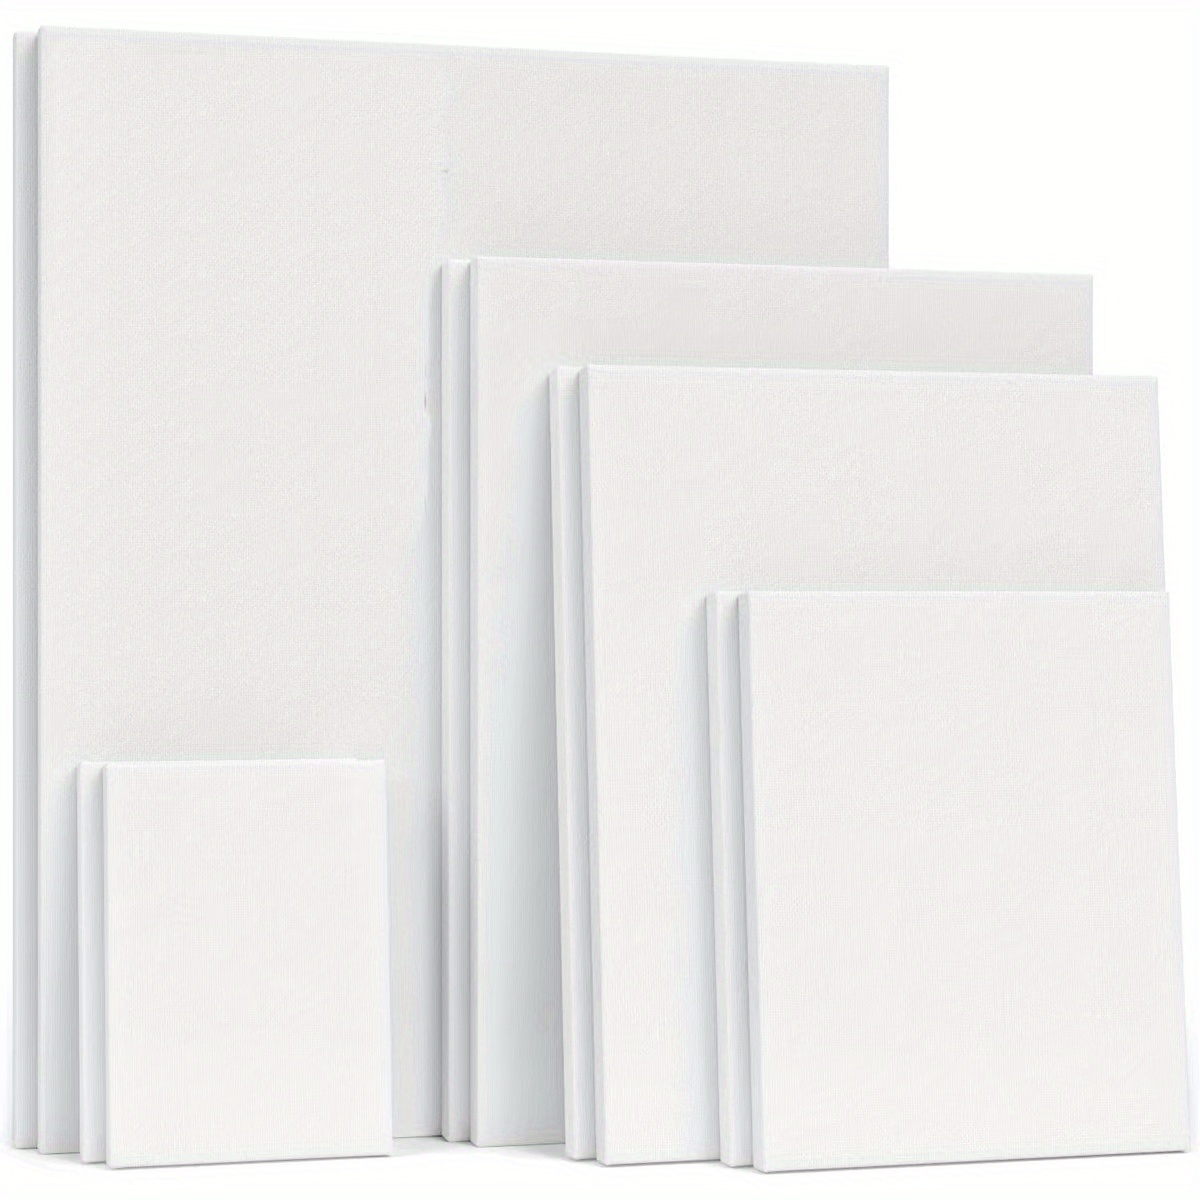 Canvas for Painting Large Set of 28 Pieces - 7 x 13x18 + 20x25 + 7 x A4  (24x30cm) + 7 x A3 (30x40cm) - Set of Blank Canvases for Oil Paint